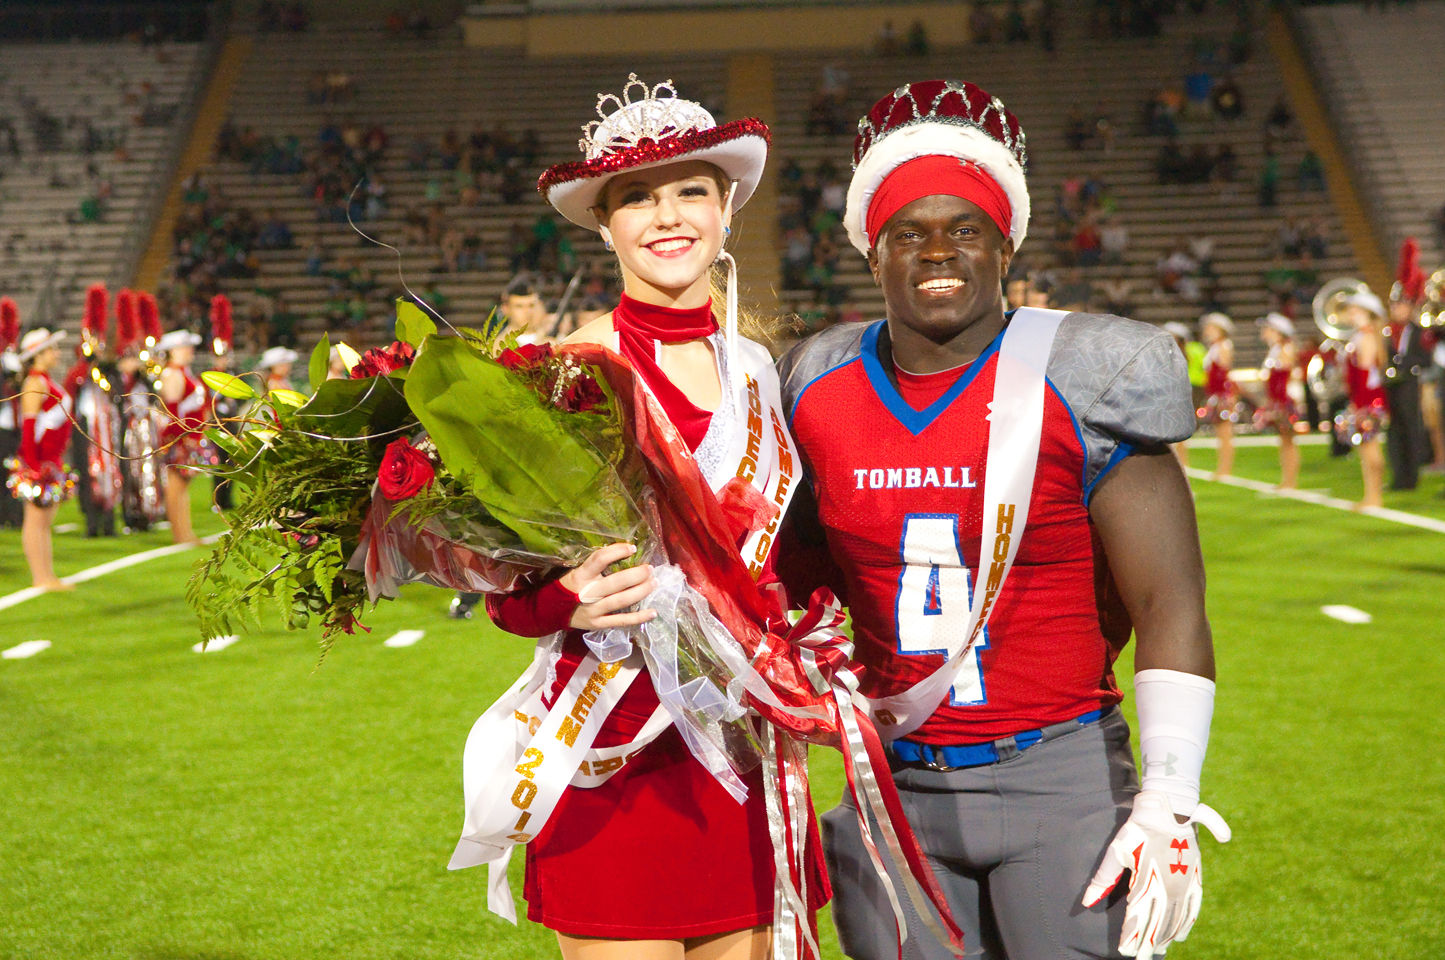 Tomball King and Queen